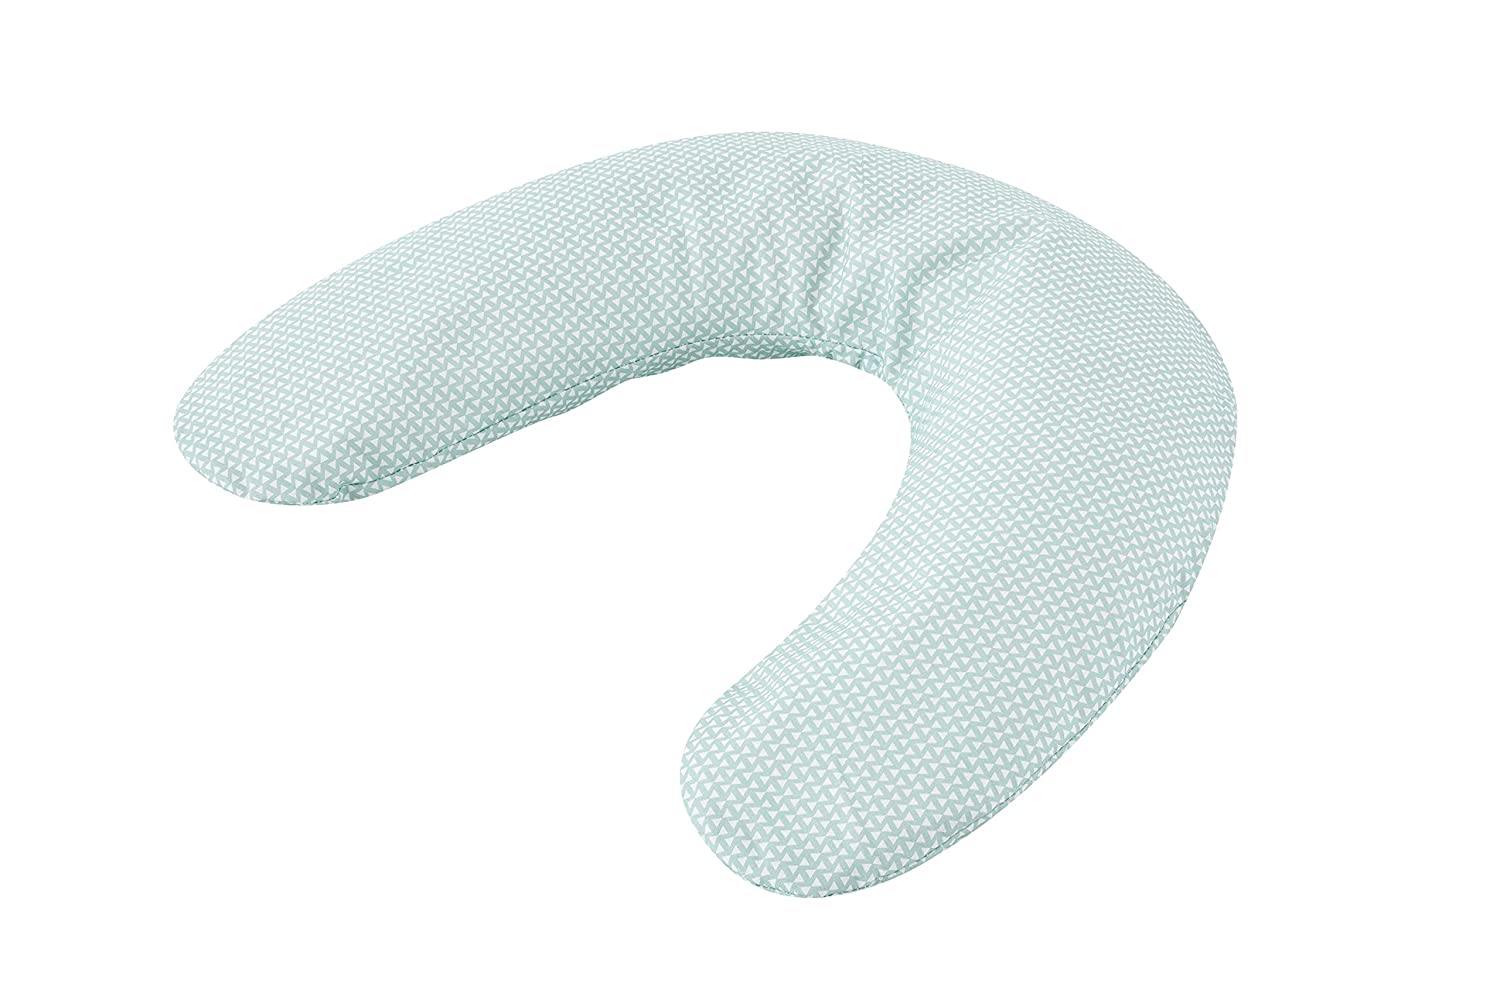 Träumeland T041029 Side Bearing Pillow | Neck pillow | Baby pillow Geo turquoise - stabilize in side position, additionally ideal as sleeping and travel pillow, multicolored